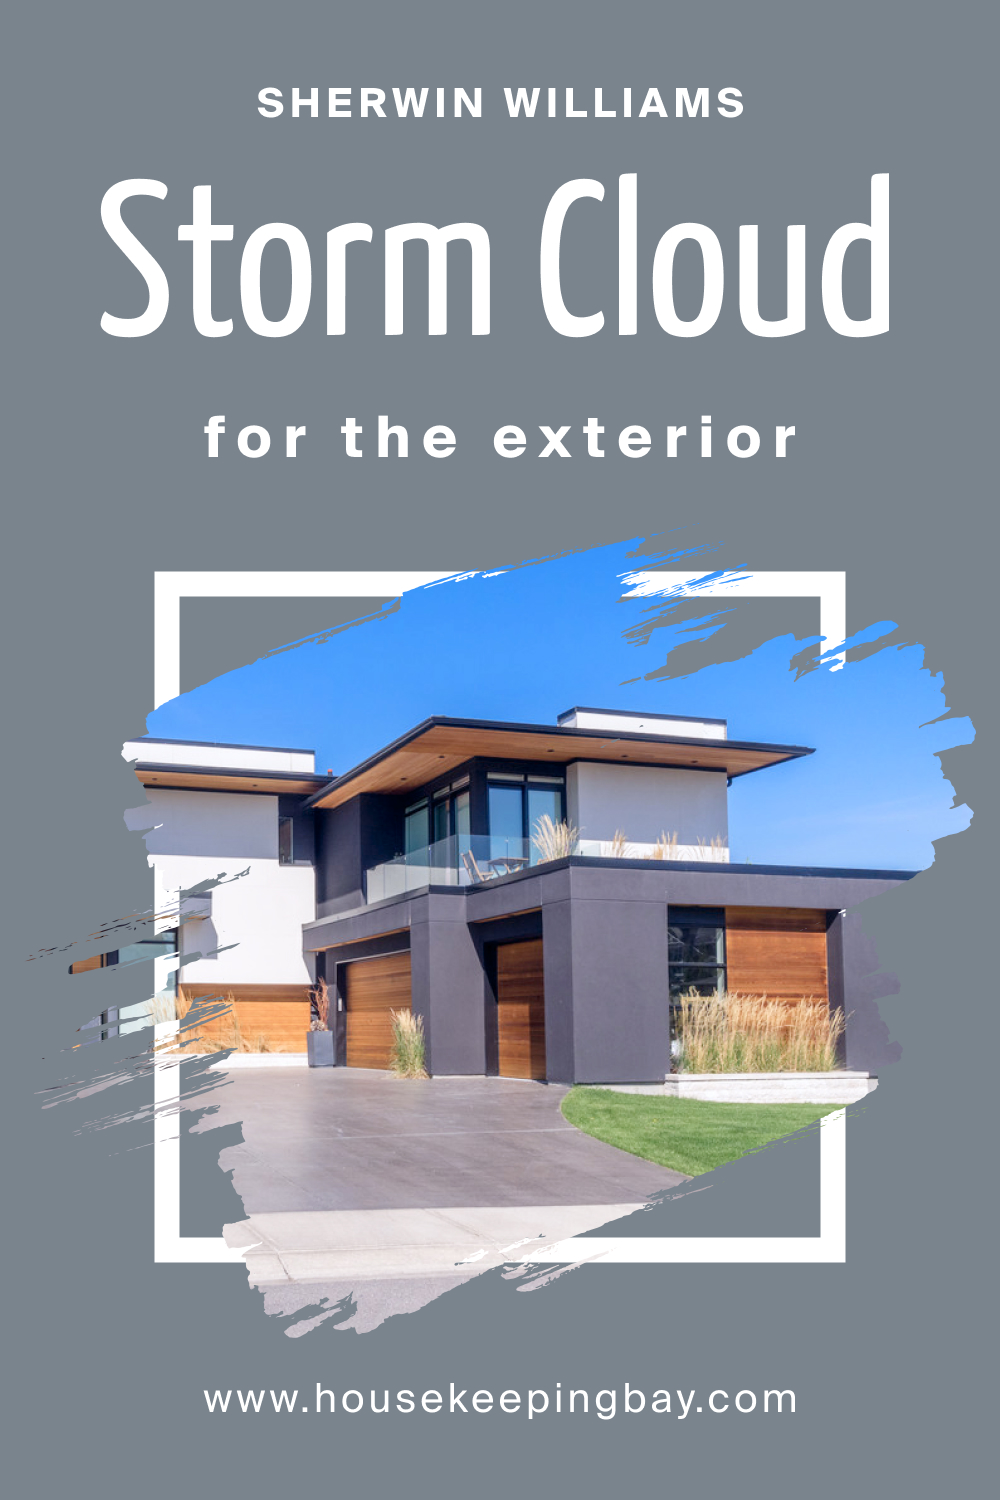 Sherwin Williams. SW 6249 Storm Cloud For the exterior